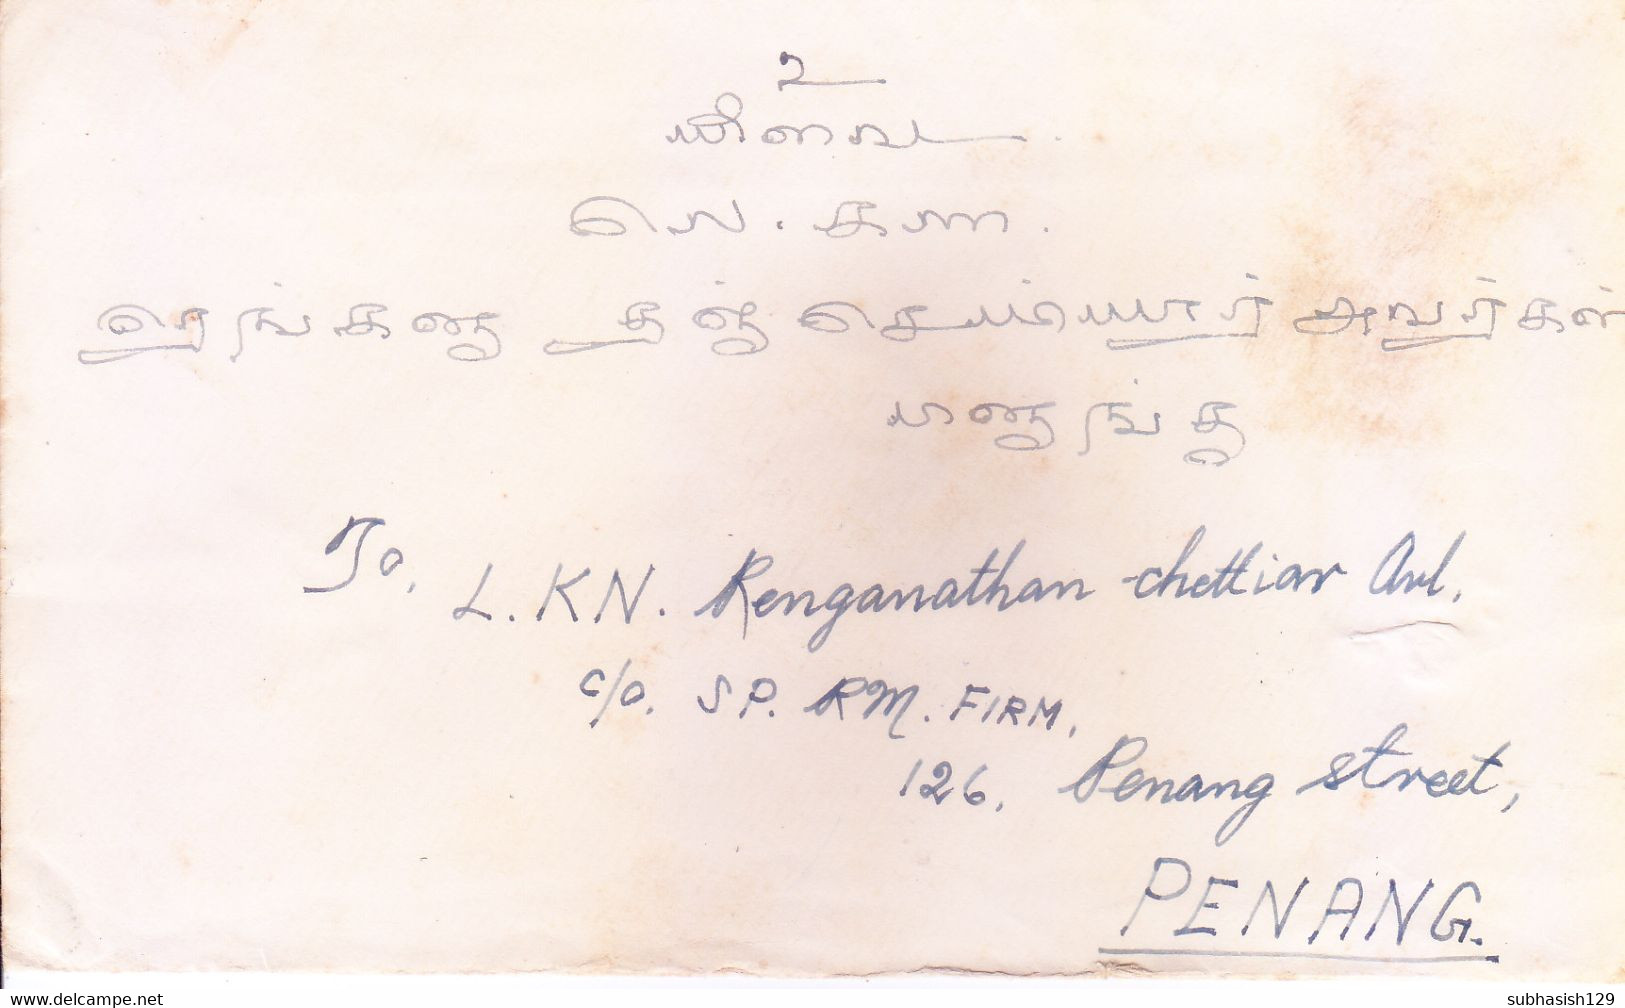 MALAYA SEREMBAN : USED COVER : YEAR 1957 : POSTED FROM SERAMBAN FOR INDIA : USE OF 10 CENTSTAMPS - Negri Sembilan